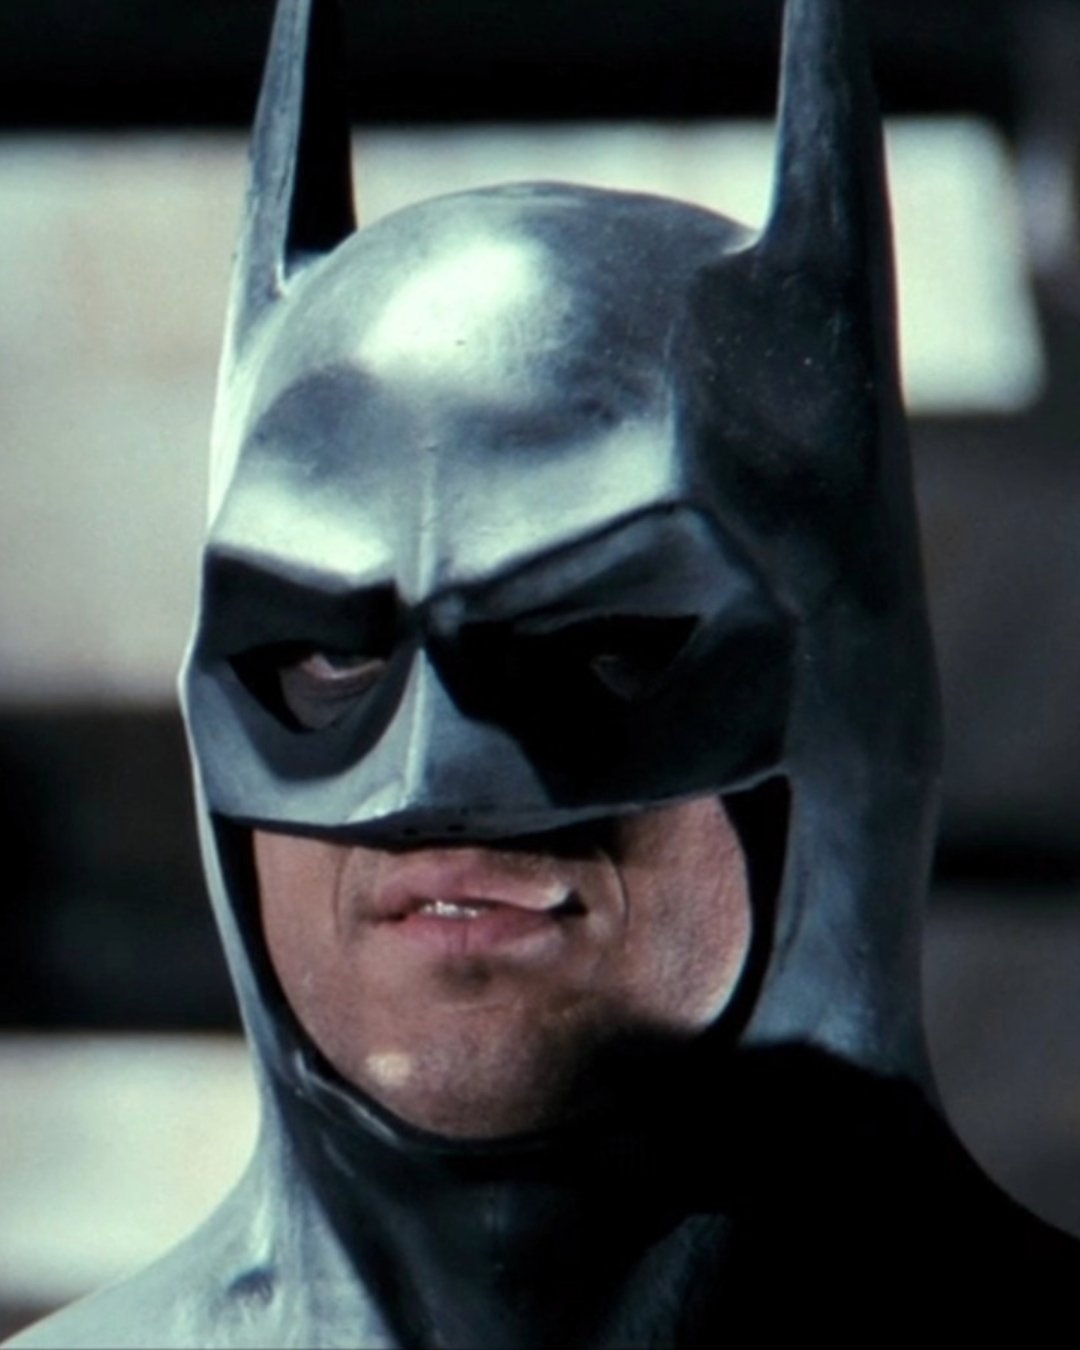 🌟🦇 Michael Keaton's portrayal of Batman leaped from comic book pages into our hearts. His performance won over audiences worldwide, showcasing a Batman who was both mysterious and deeply human. The film sparked a Batmania that reignited interest in